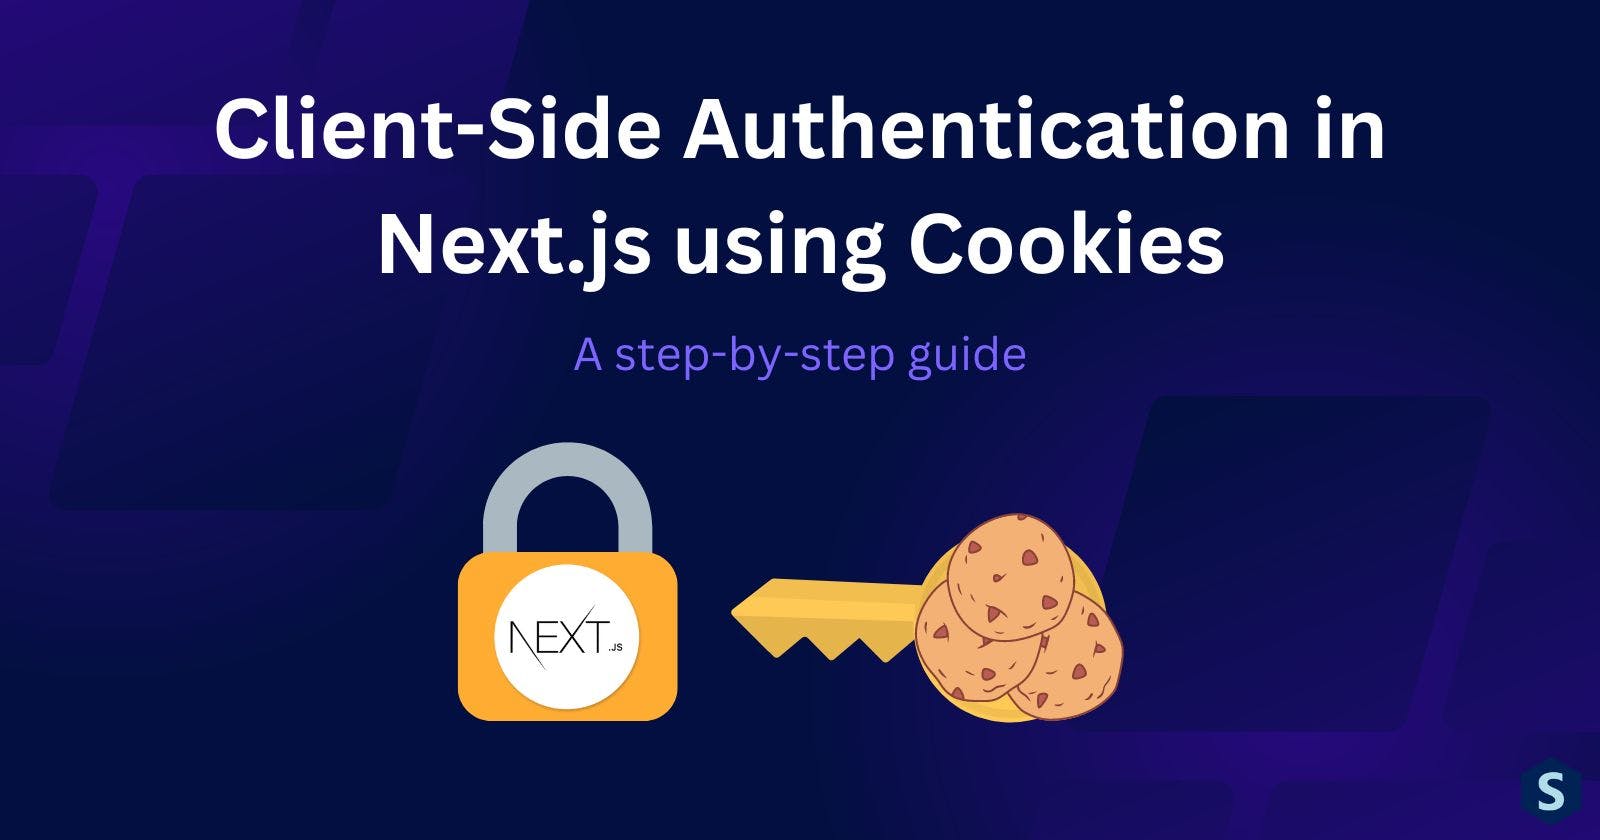 Client-Side Authentication in Next.js using Cookies